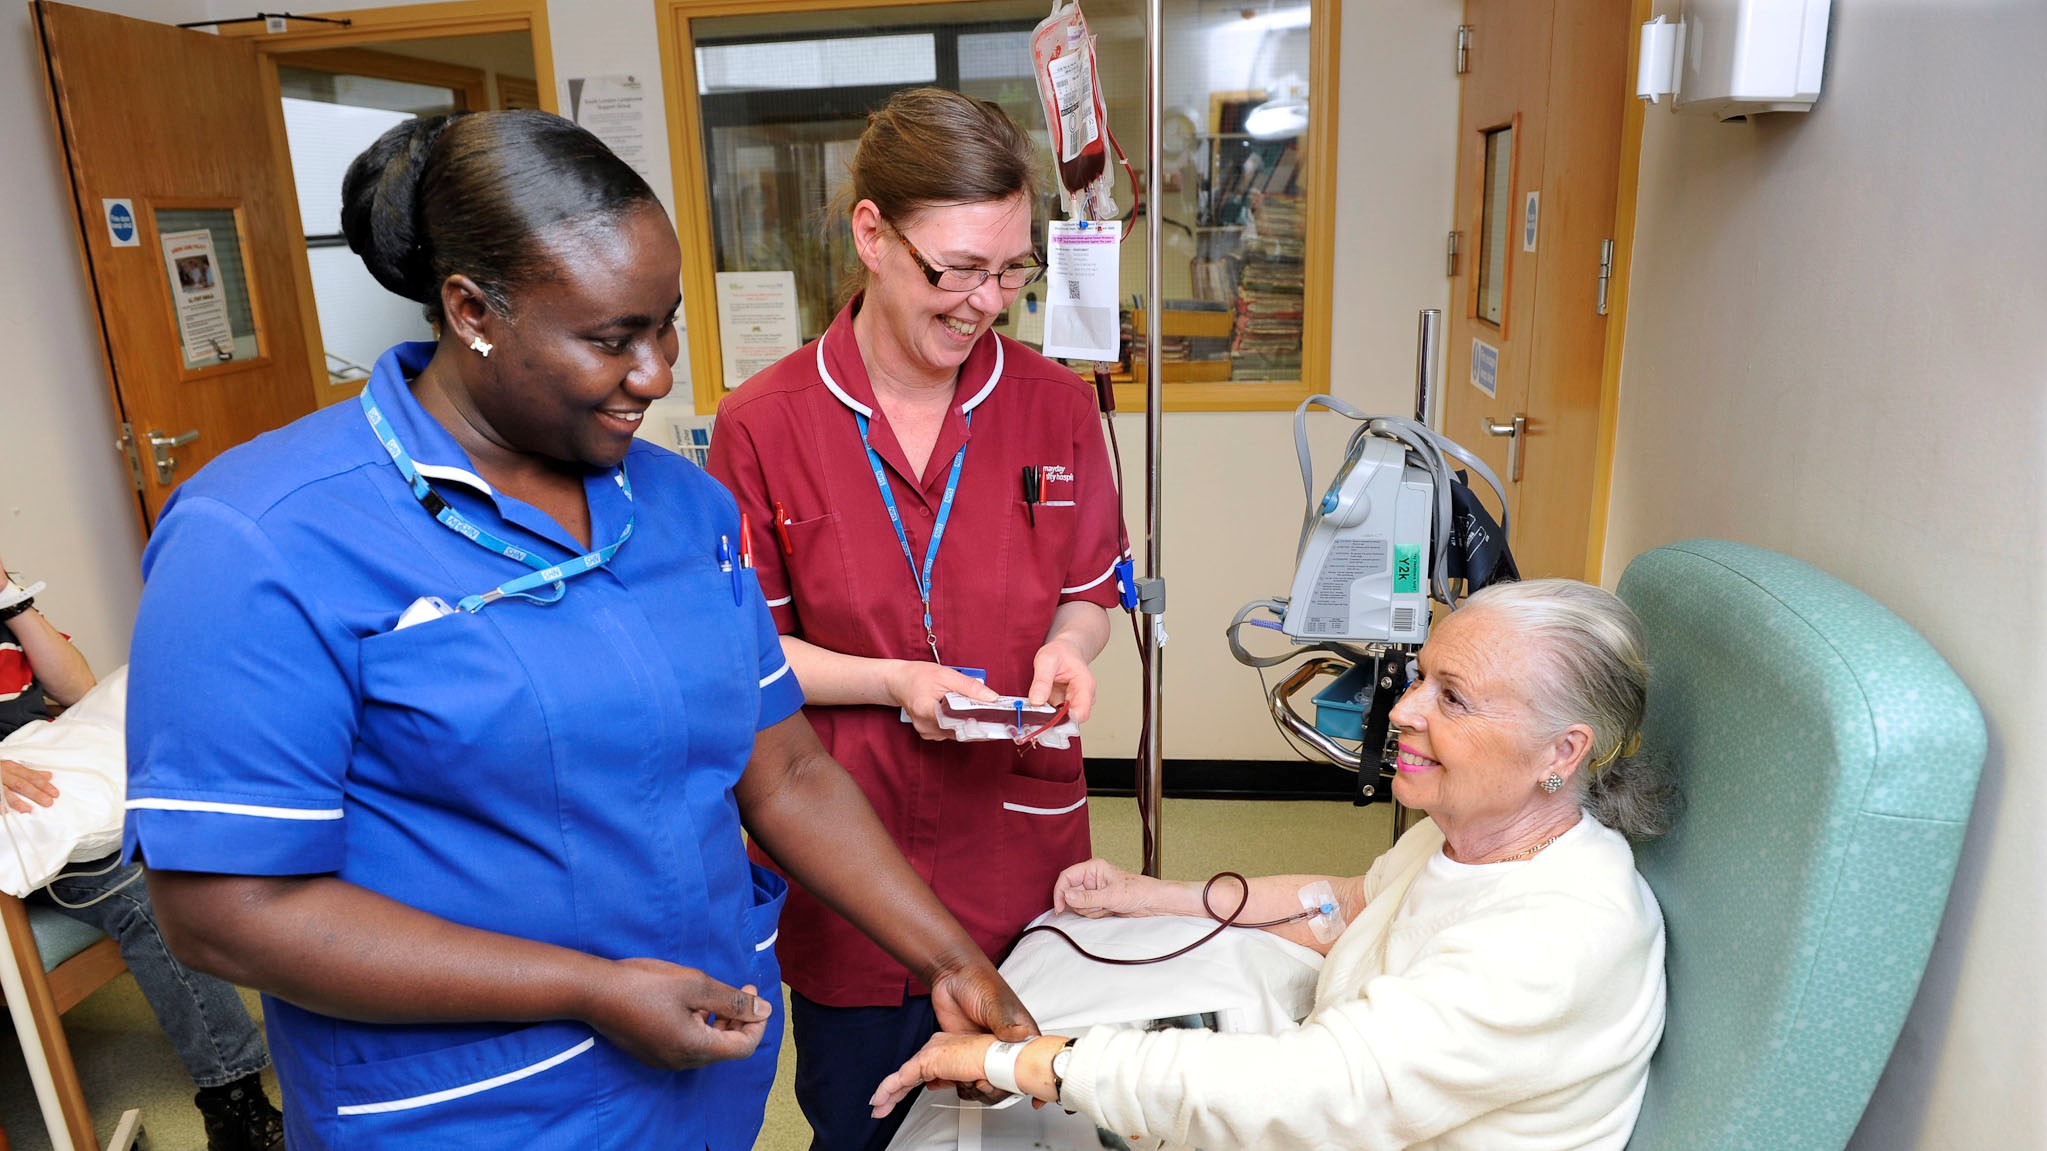 Elderly patient with two members of hospital staff